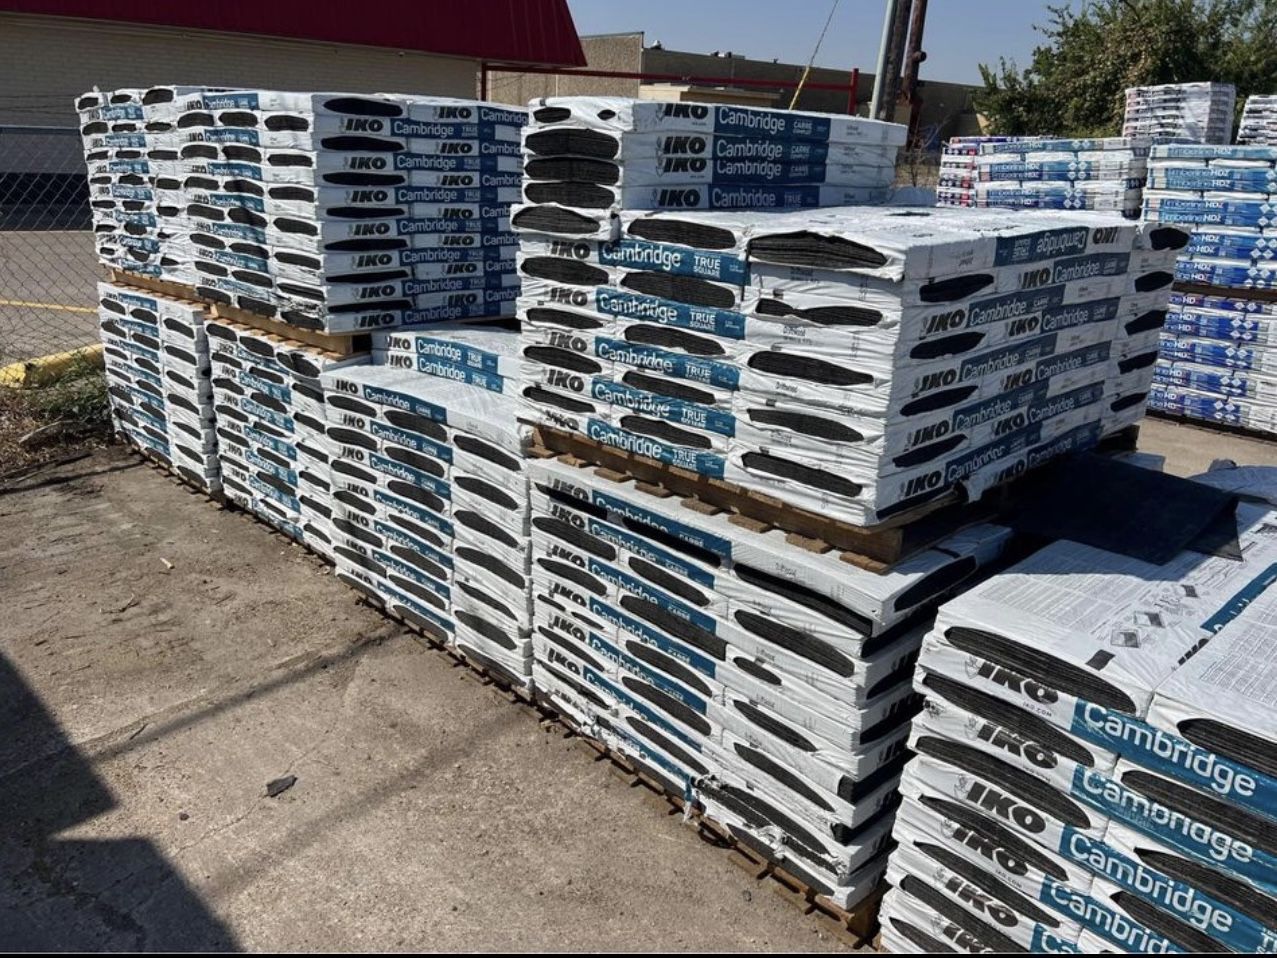 30 Years Roofing Shingles $26 Each Bondle 2 Color Check Pictures Delivery Available 